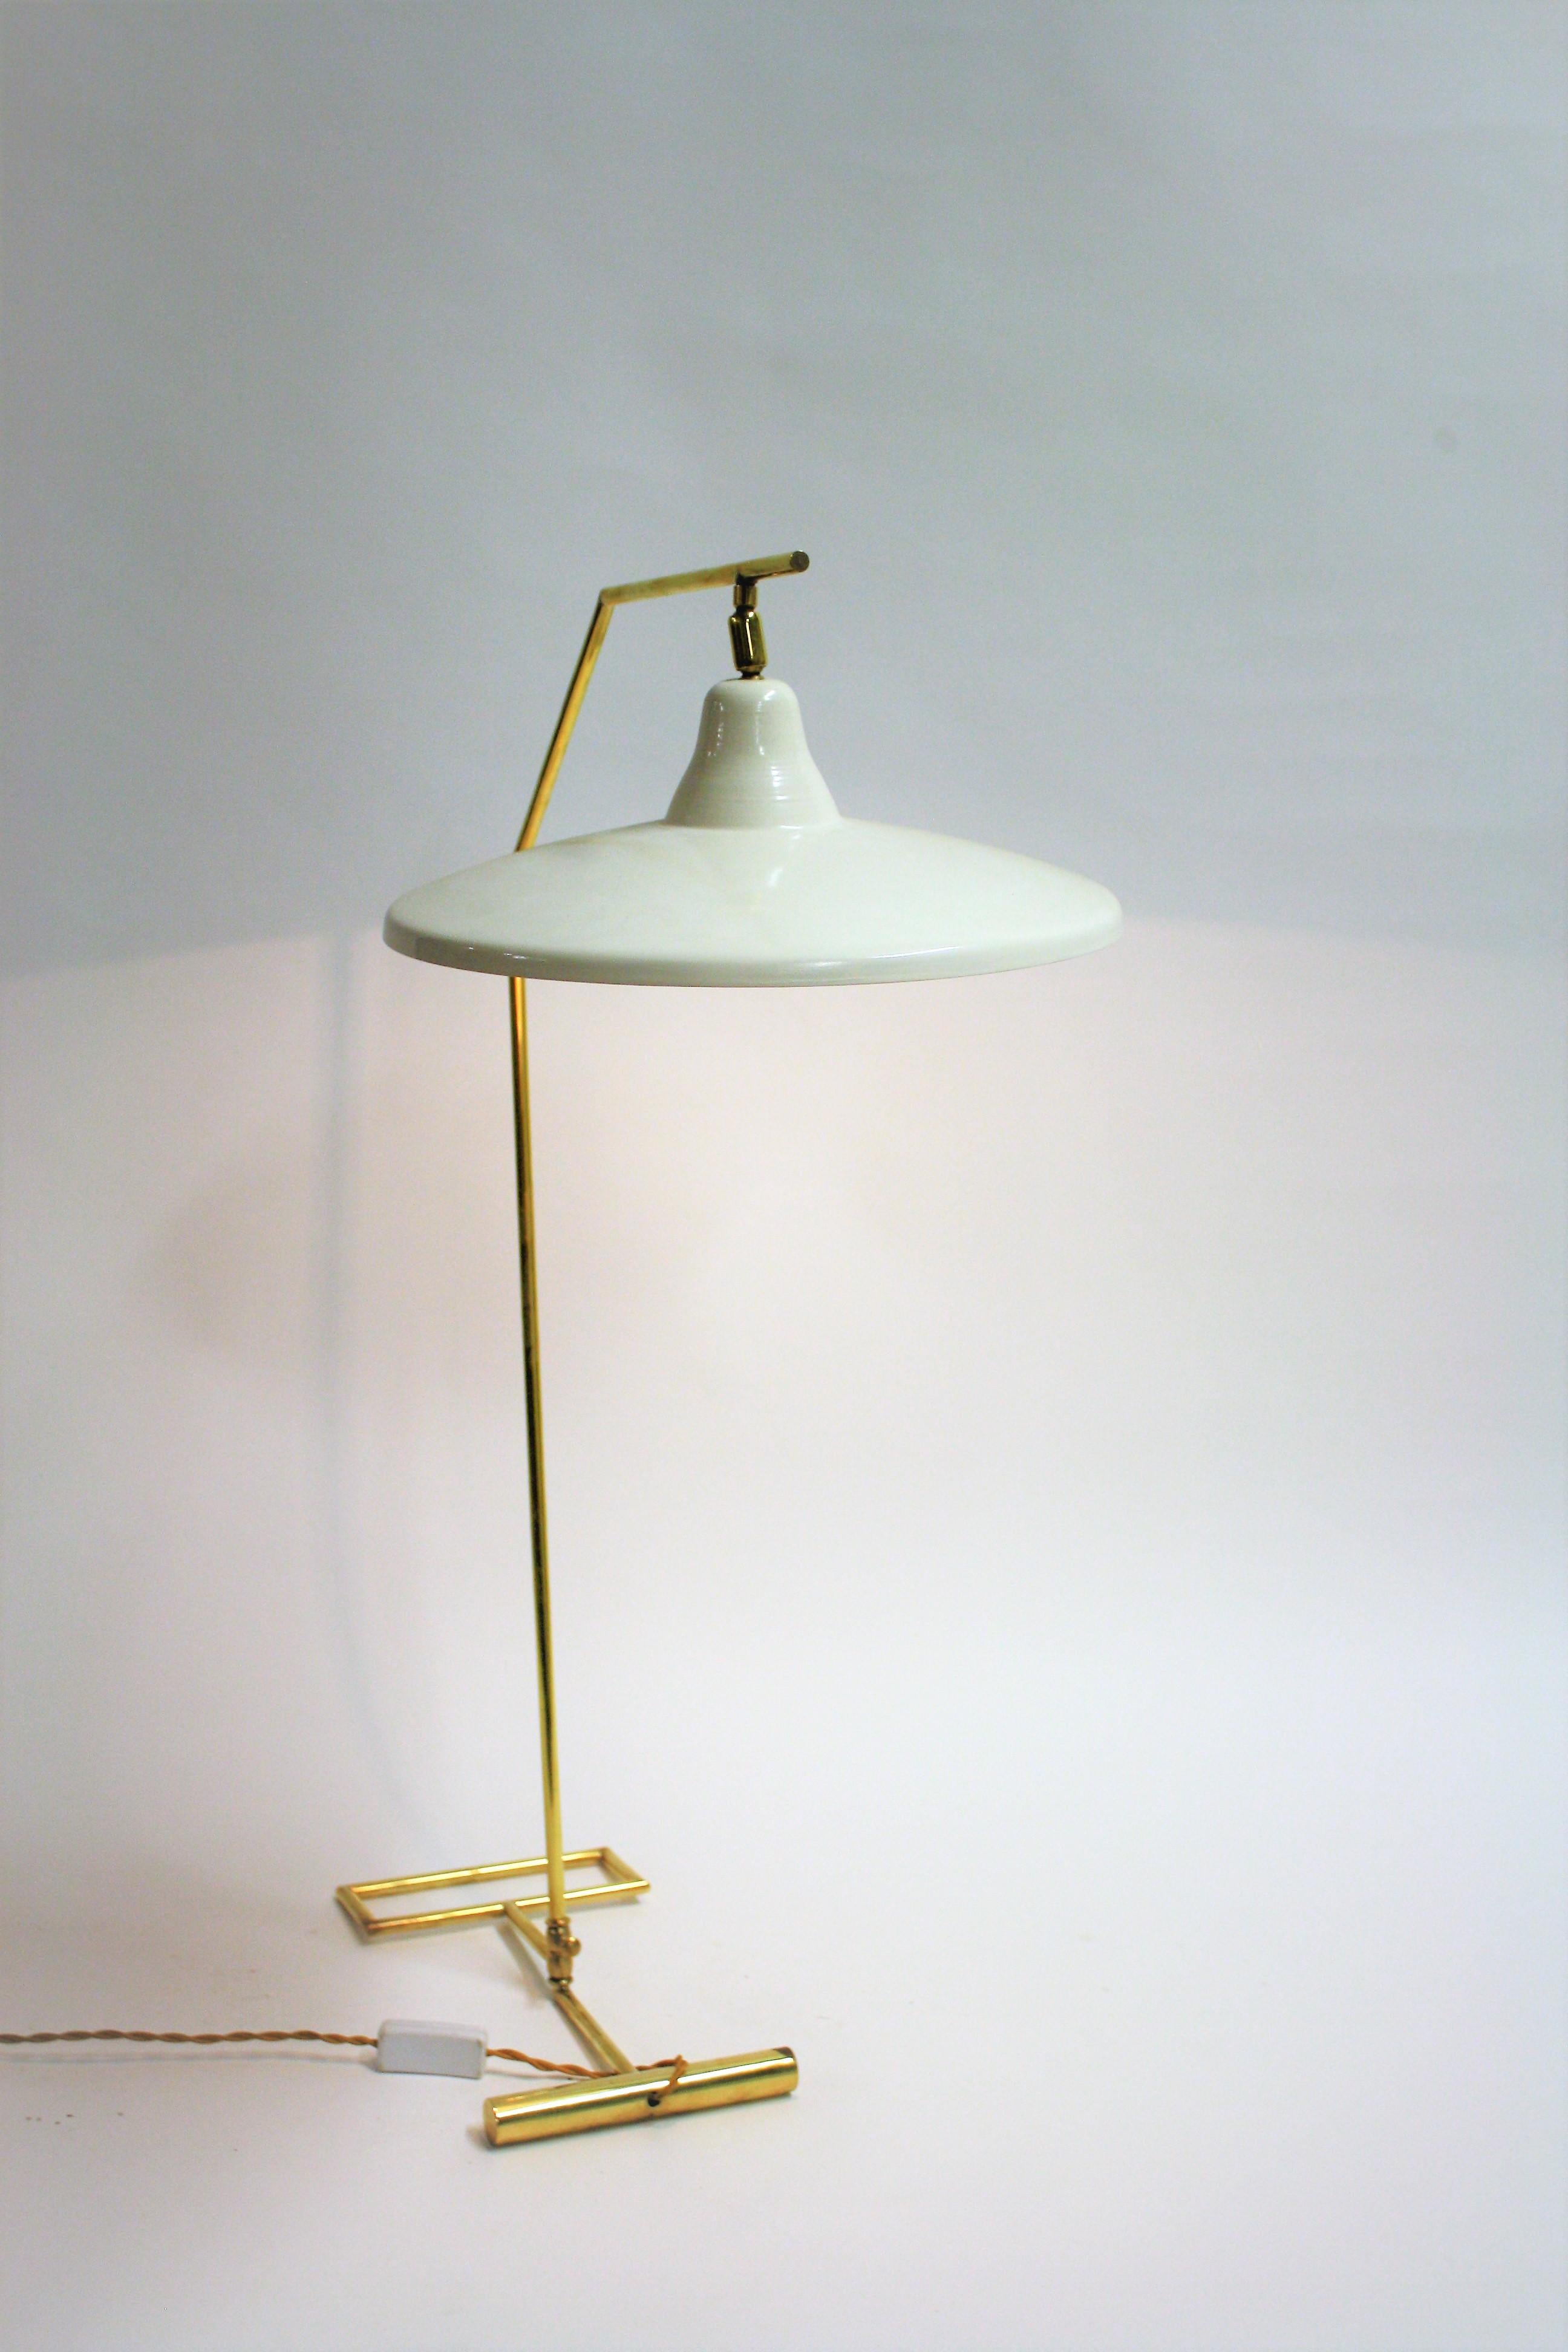 Beautiful desk lamp or floor lamp with a finely crafted articulated white lamp shade.

This brass lamp was cleverly designed to be used both as a small floor lamp or a large desk lamp.

It can be placed steady on the ground or installed at the